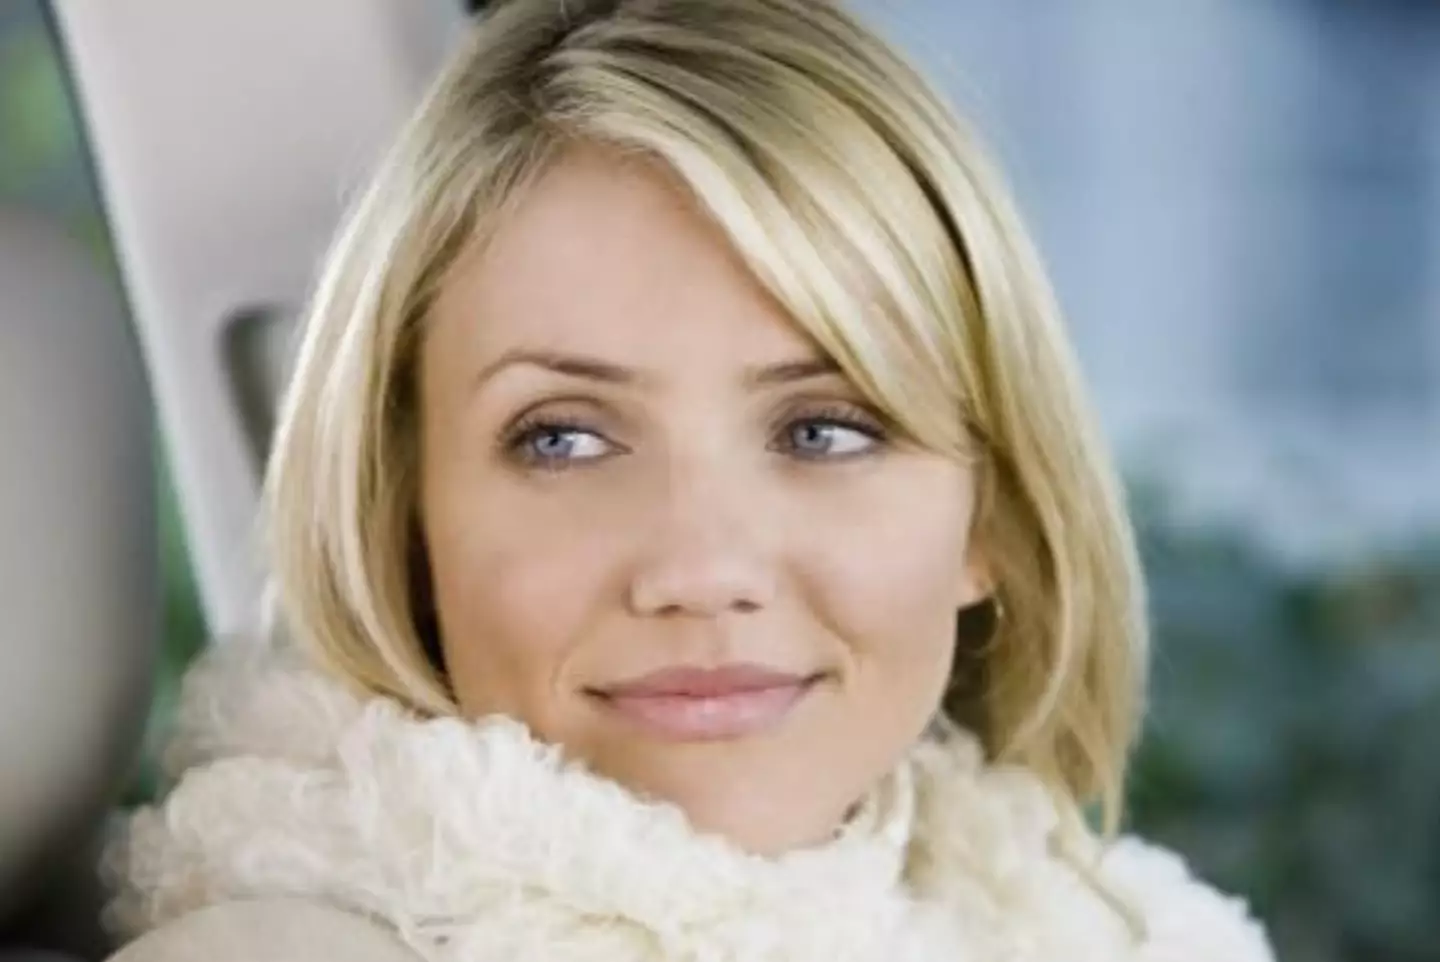 Cameron Diaz's character could have allegedly found herself a victim to a murder.